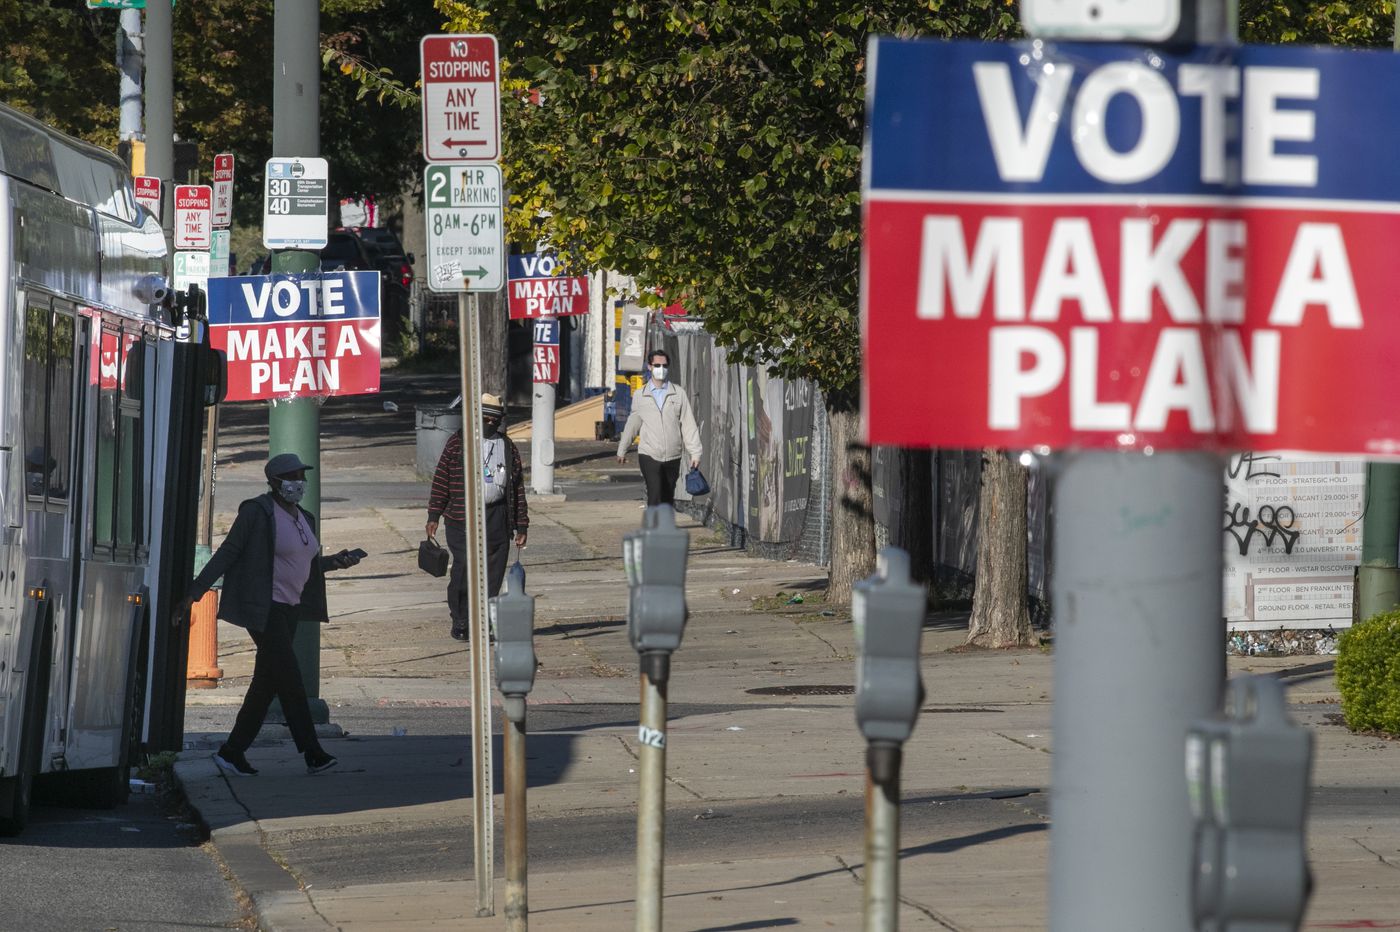 Voting in person on Election Day in Philadelphia and Pennsylvania? What